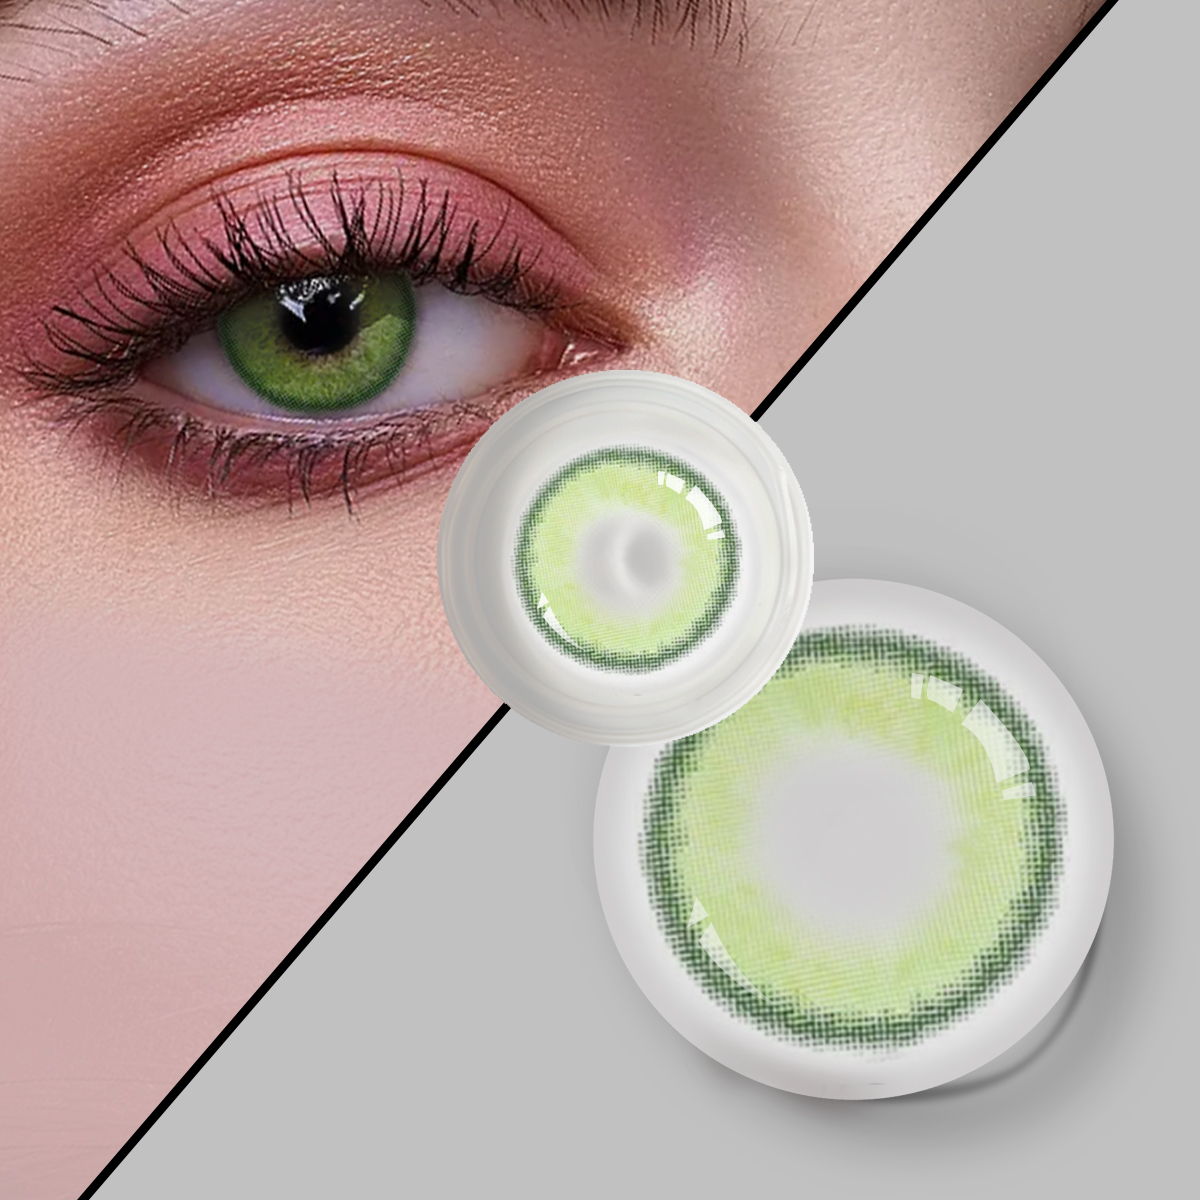 DBeyes contact lens cardboard package for contact lens contact lenses green